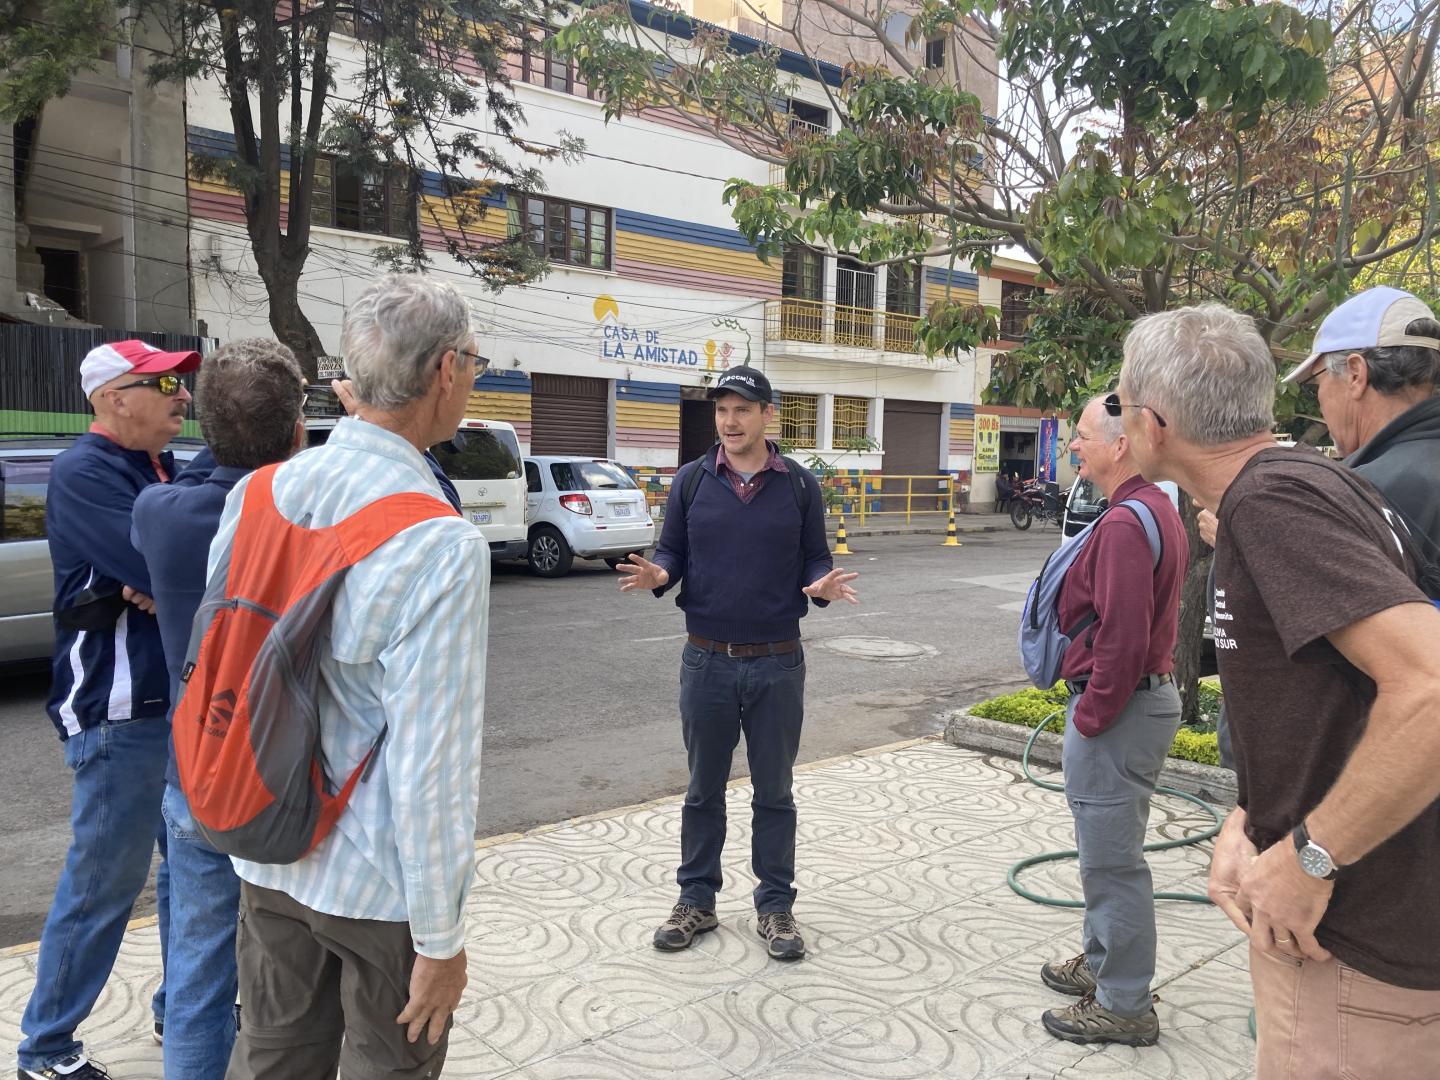 A man in a ball cap talking with a group of people on the side of a street